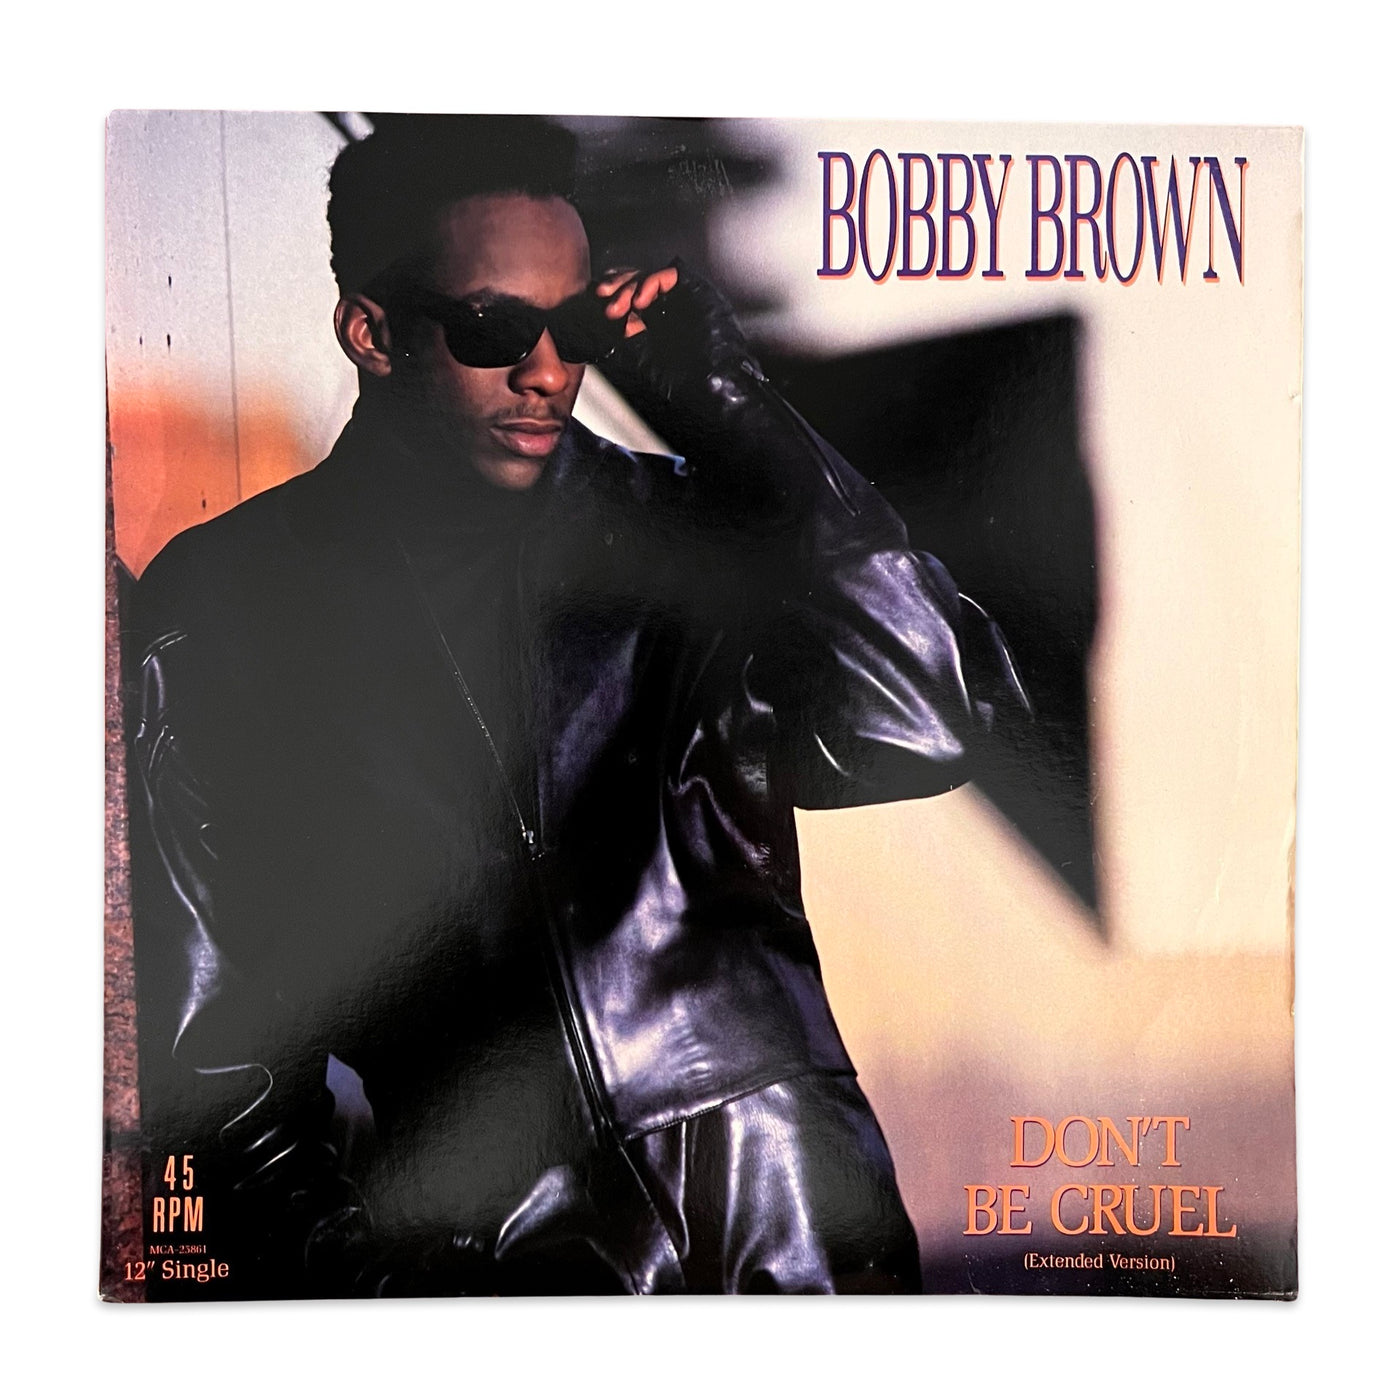 Bobby Brown – Don't Be Cruel (Extended Version) (1988)